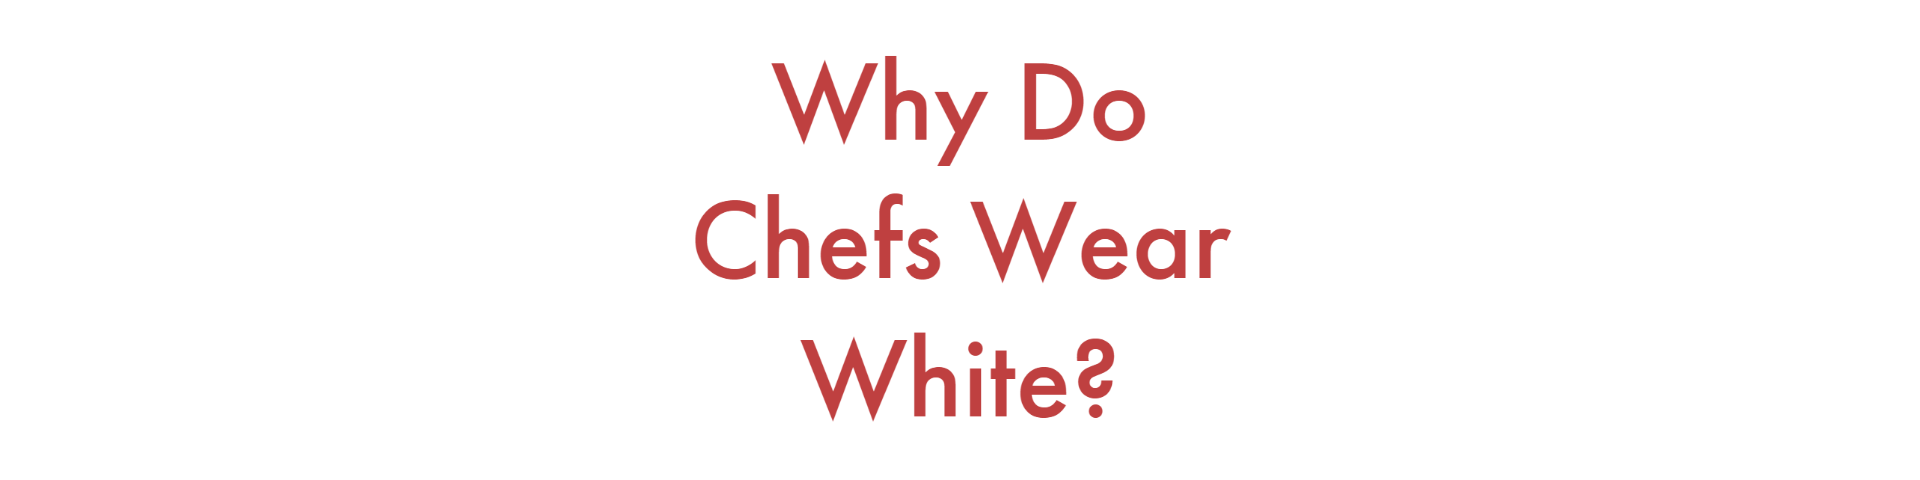 Why do chefs wear white, and other curiousities answered!